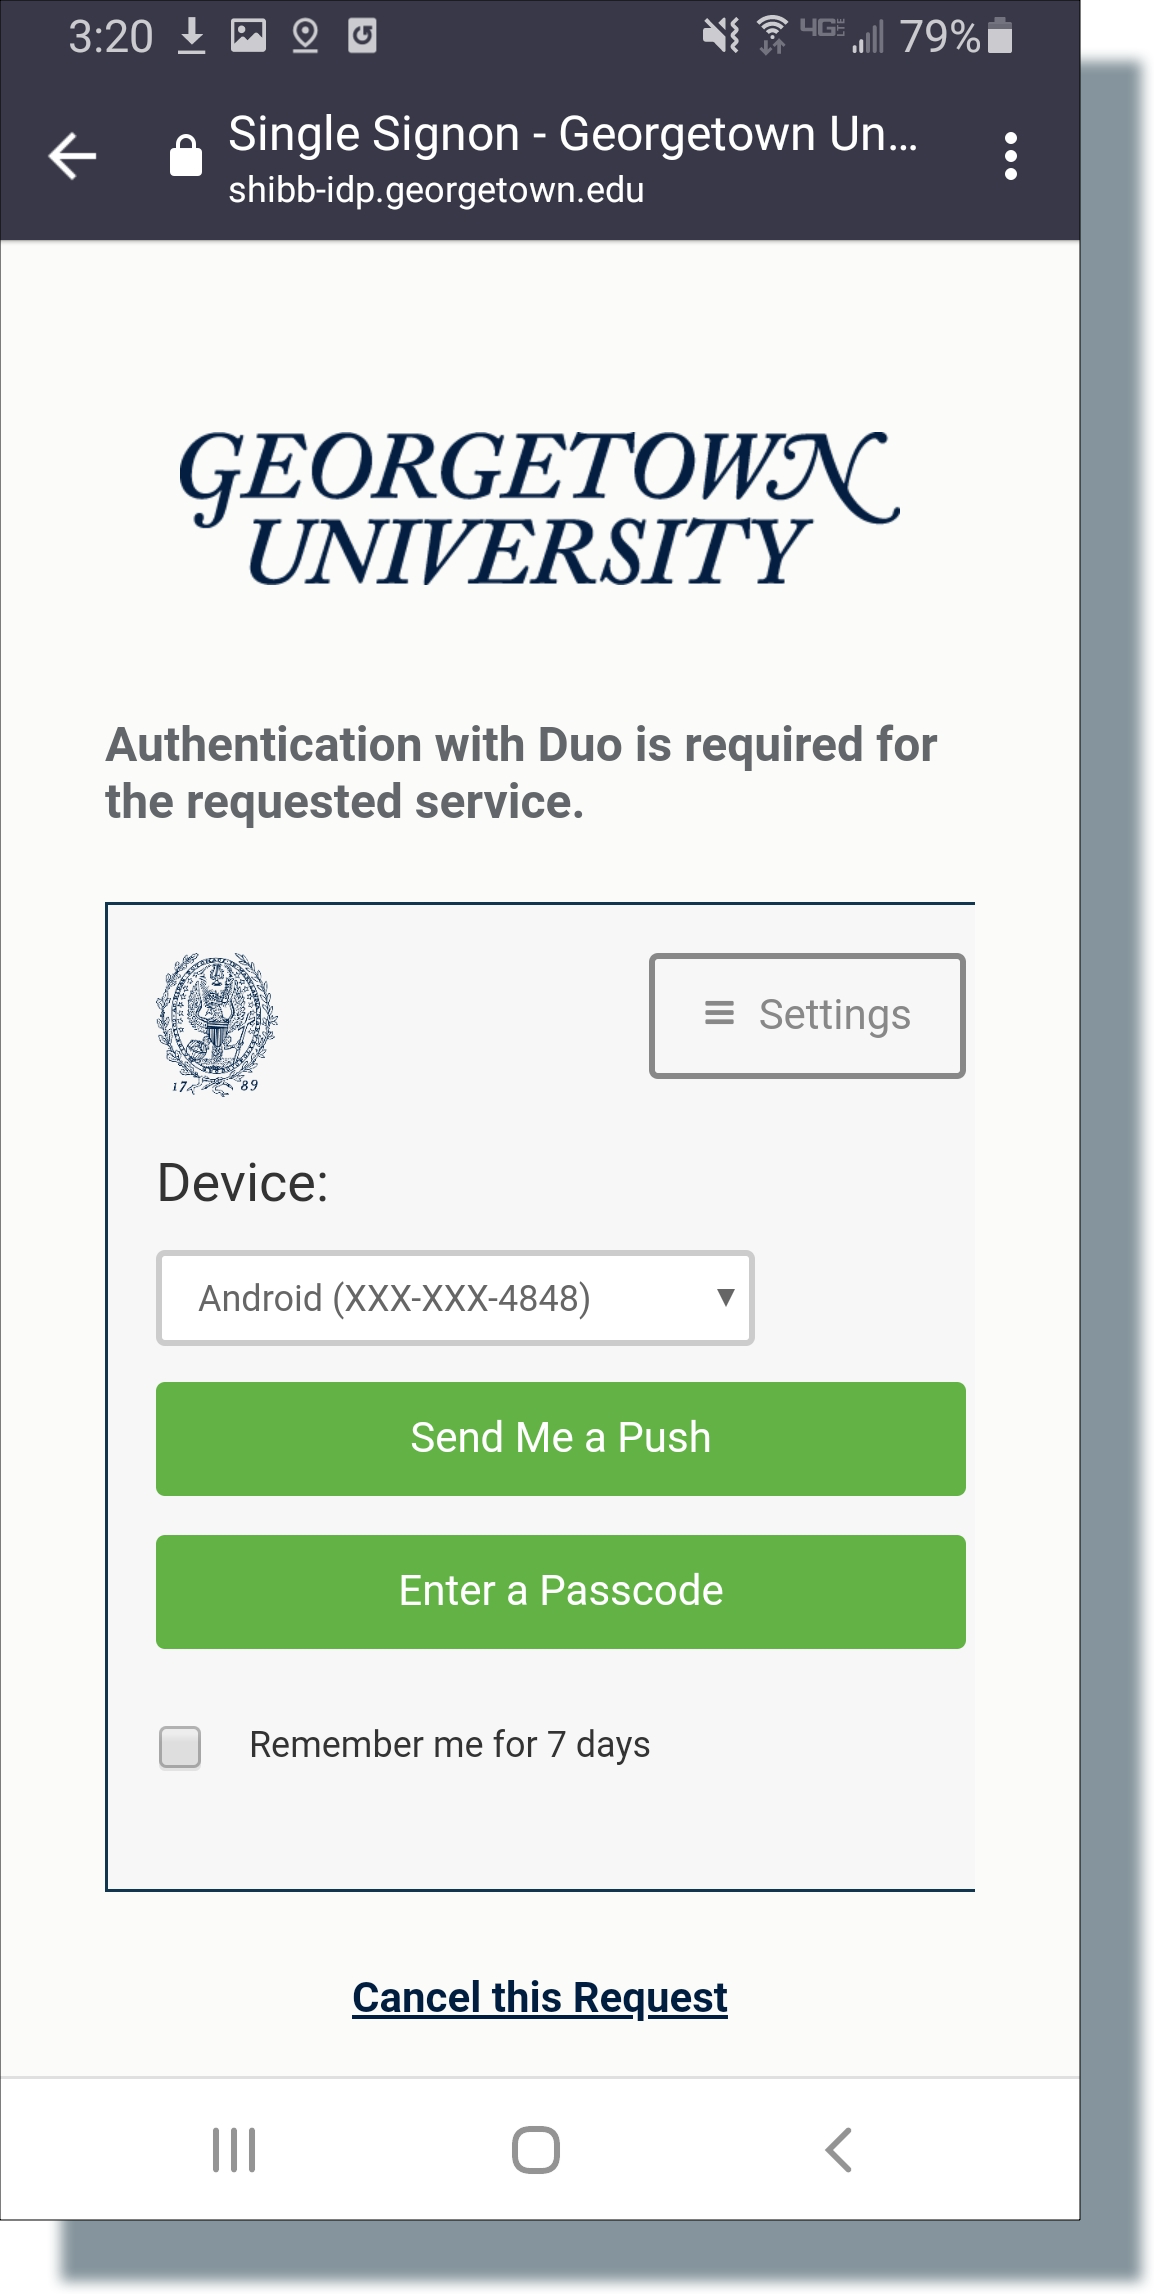 Select a Duo authentication method (Push recommended)